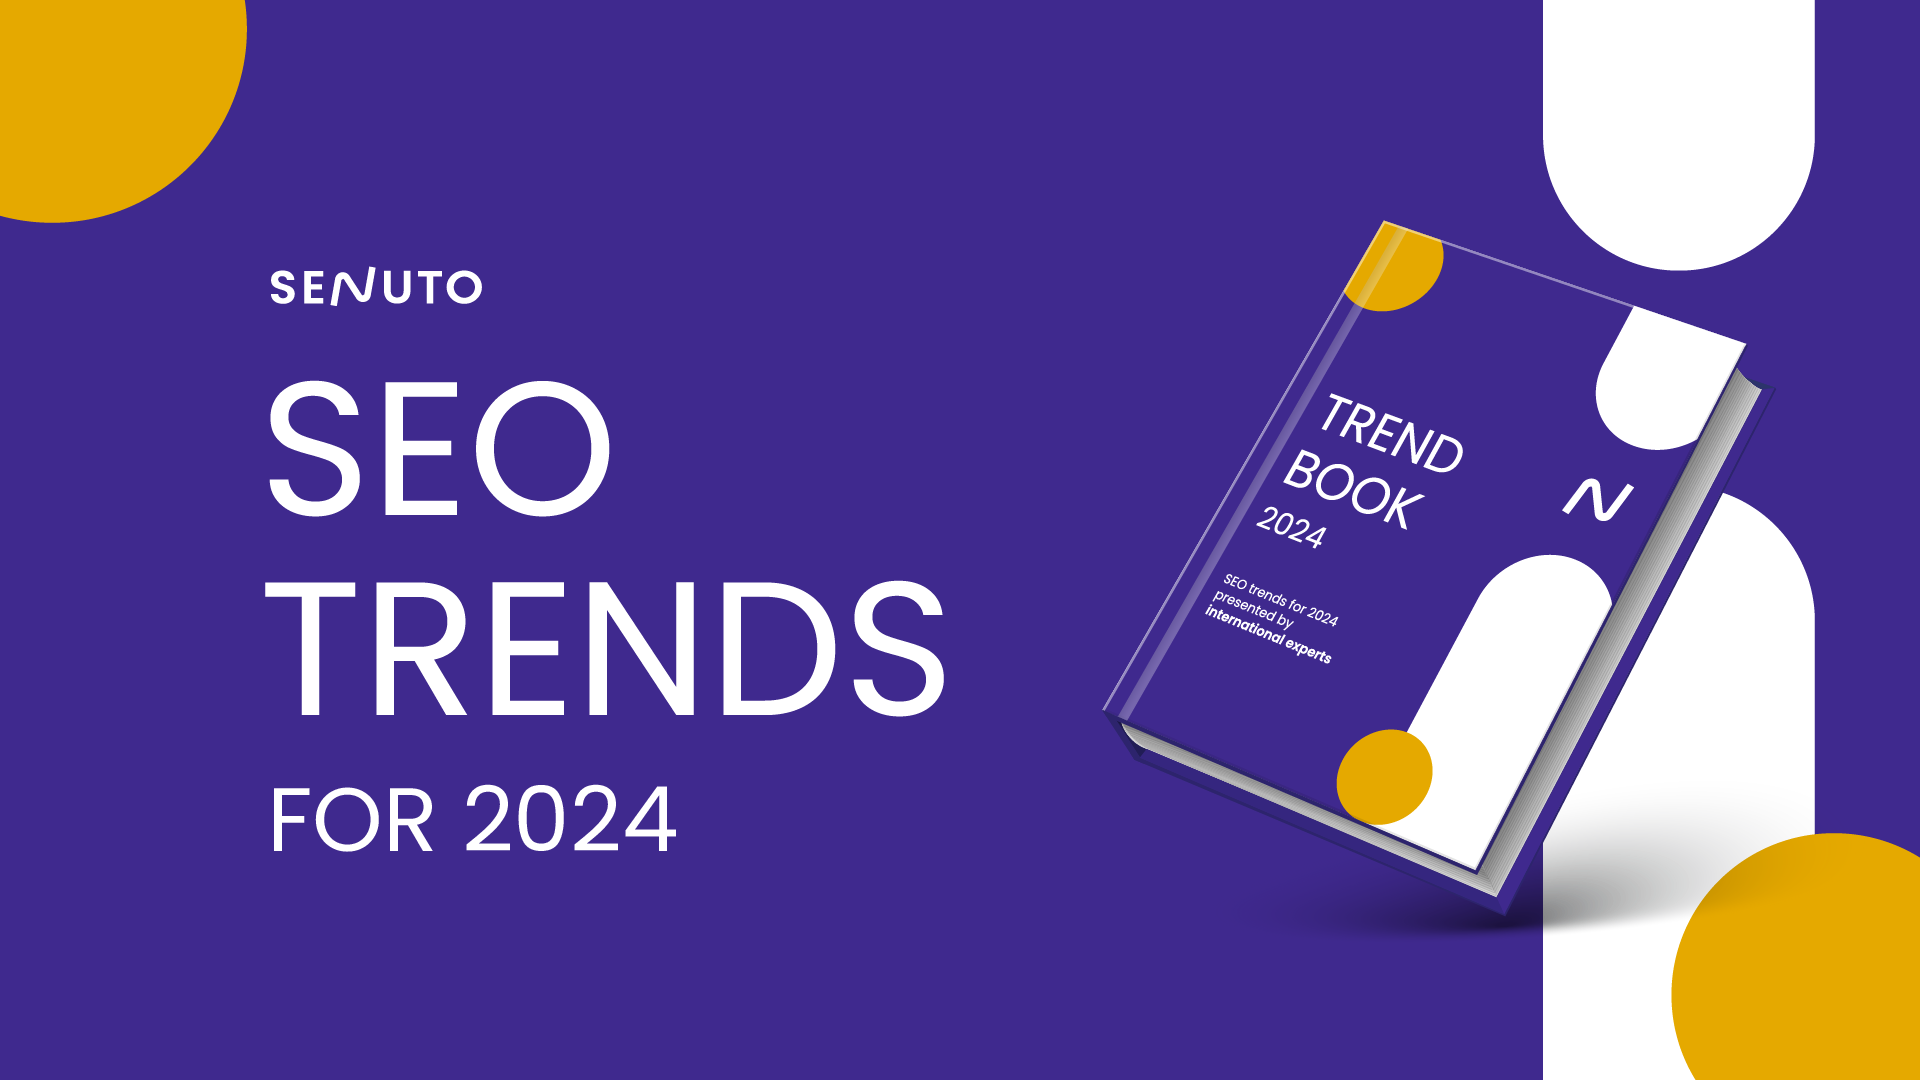 SEO trends for 2024